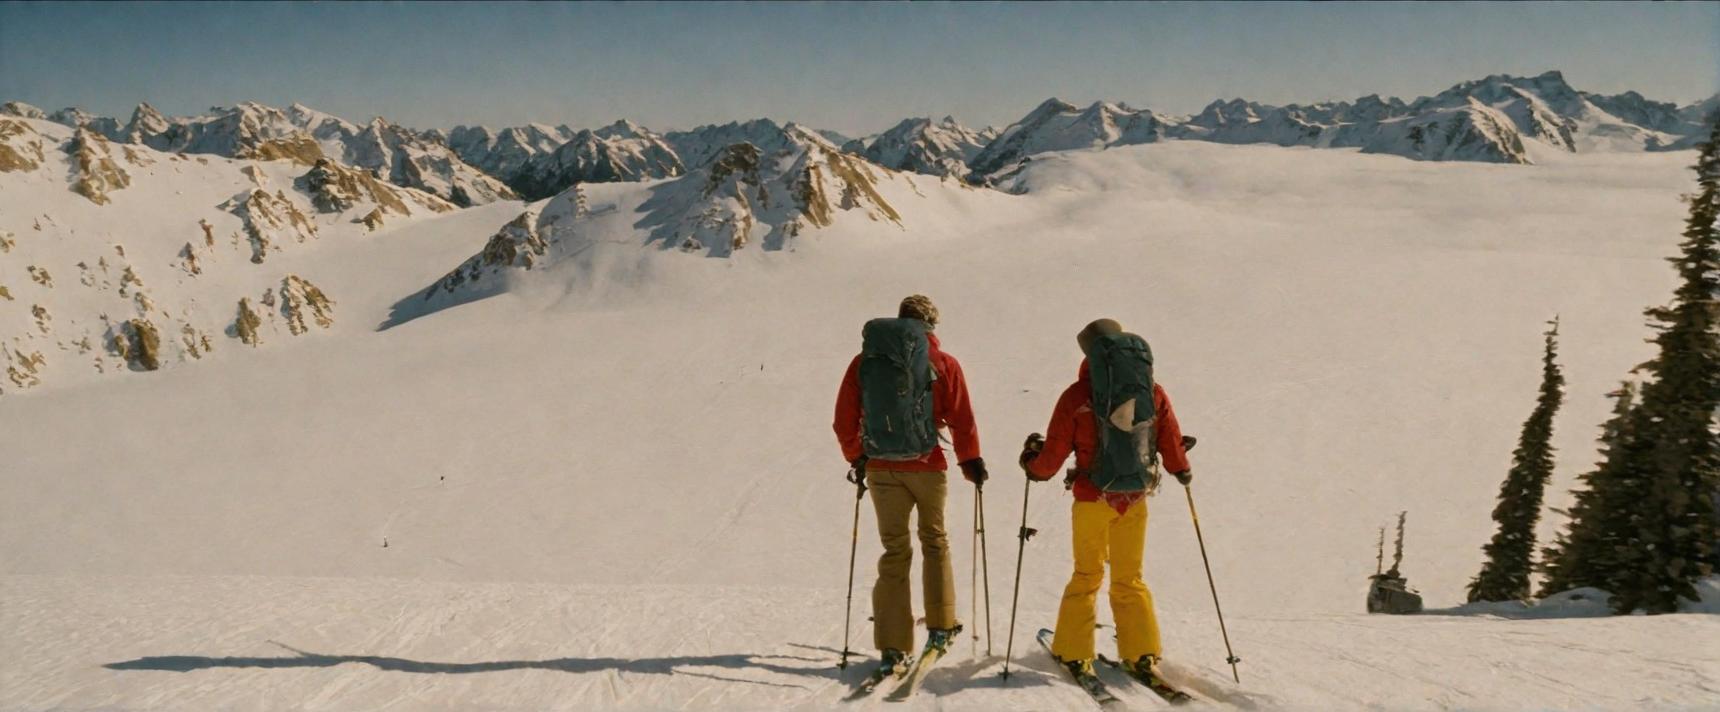  Two skiers standing on a snowy mountain slope with panoramic views of snow-capped peaks and a sea of clouds below, flanked by evergreen trees, under a clear blue sky.